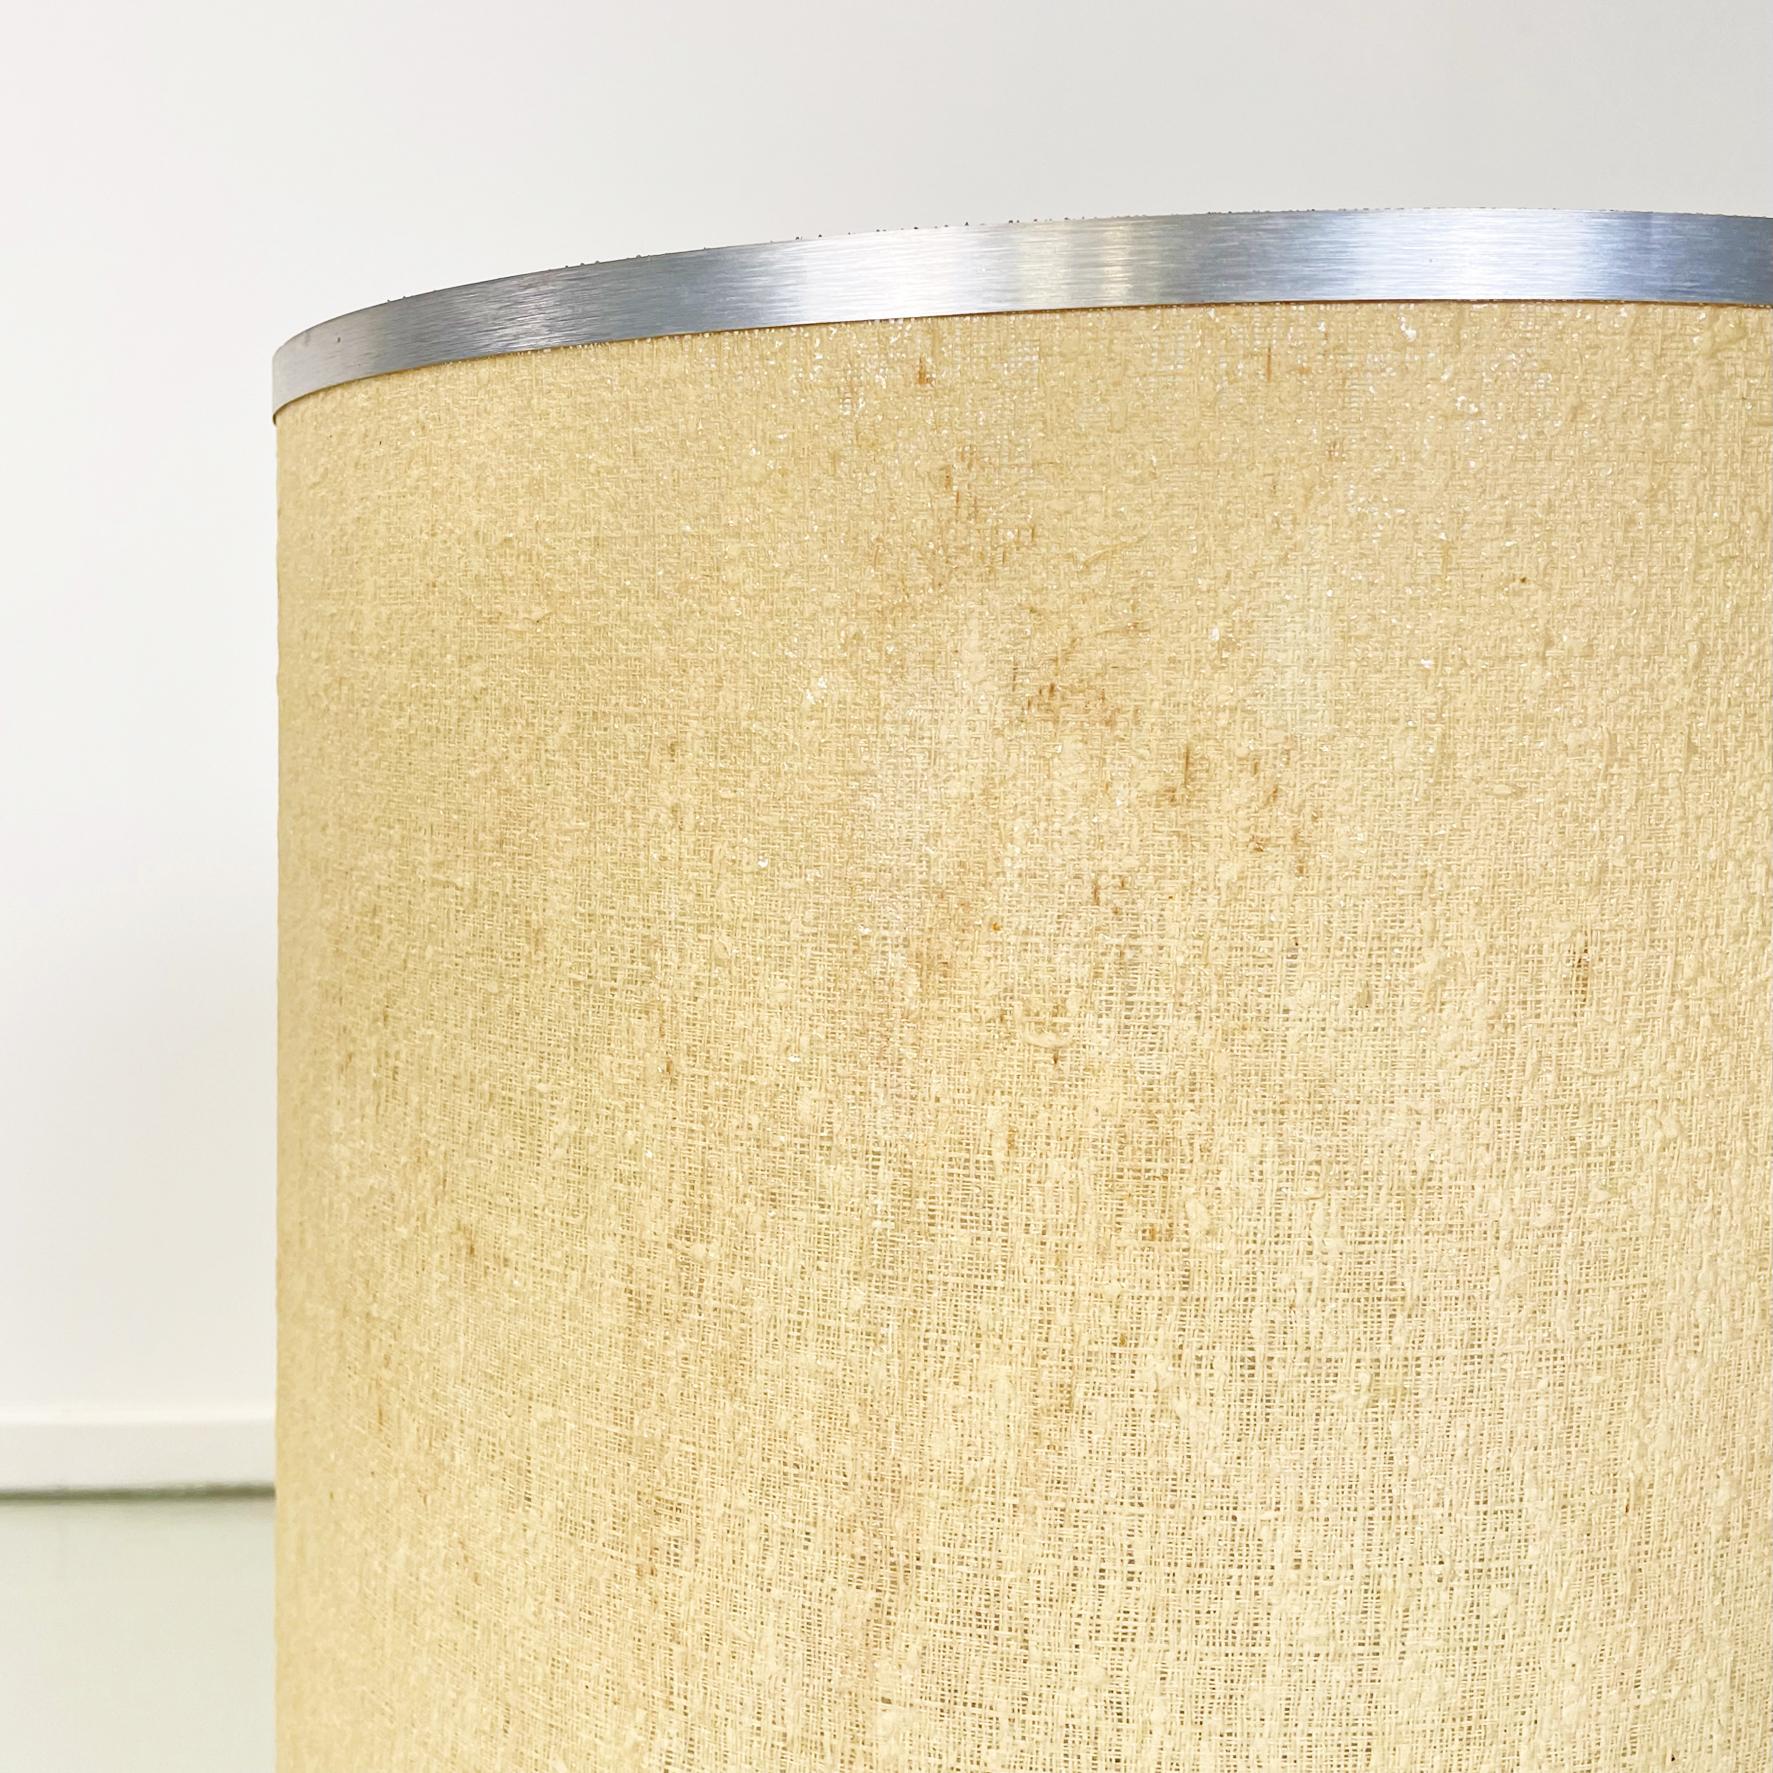 Mid-20th Century Italian Mid-Century Table Lamp in Beige Fabric and Brushed Aluminum, 1960s For Sale